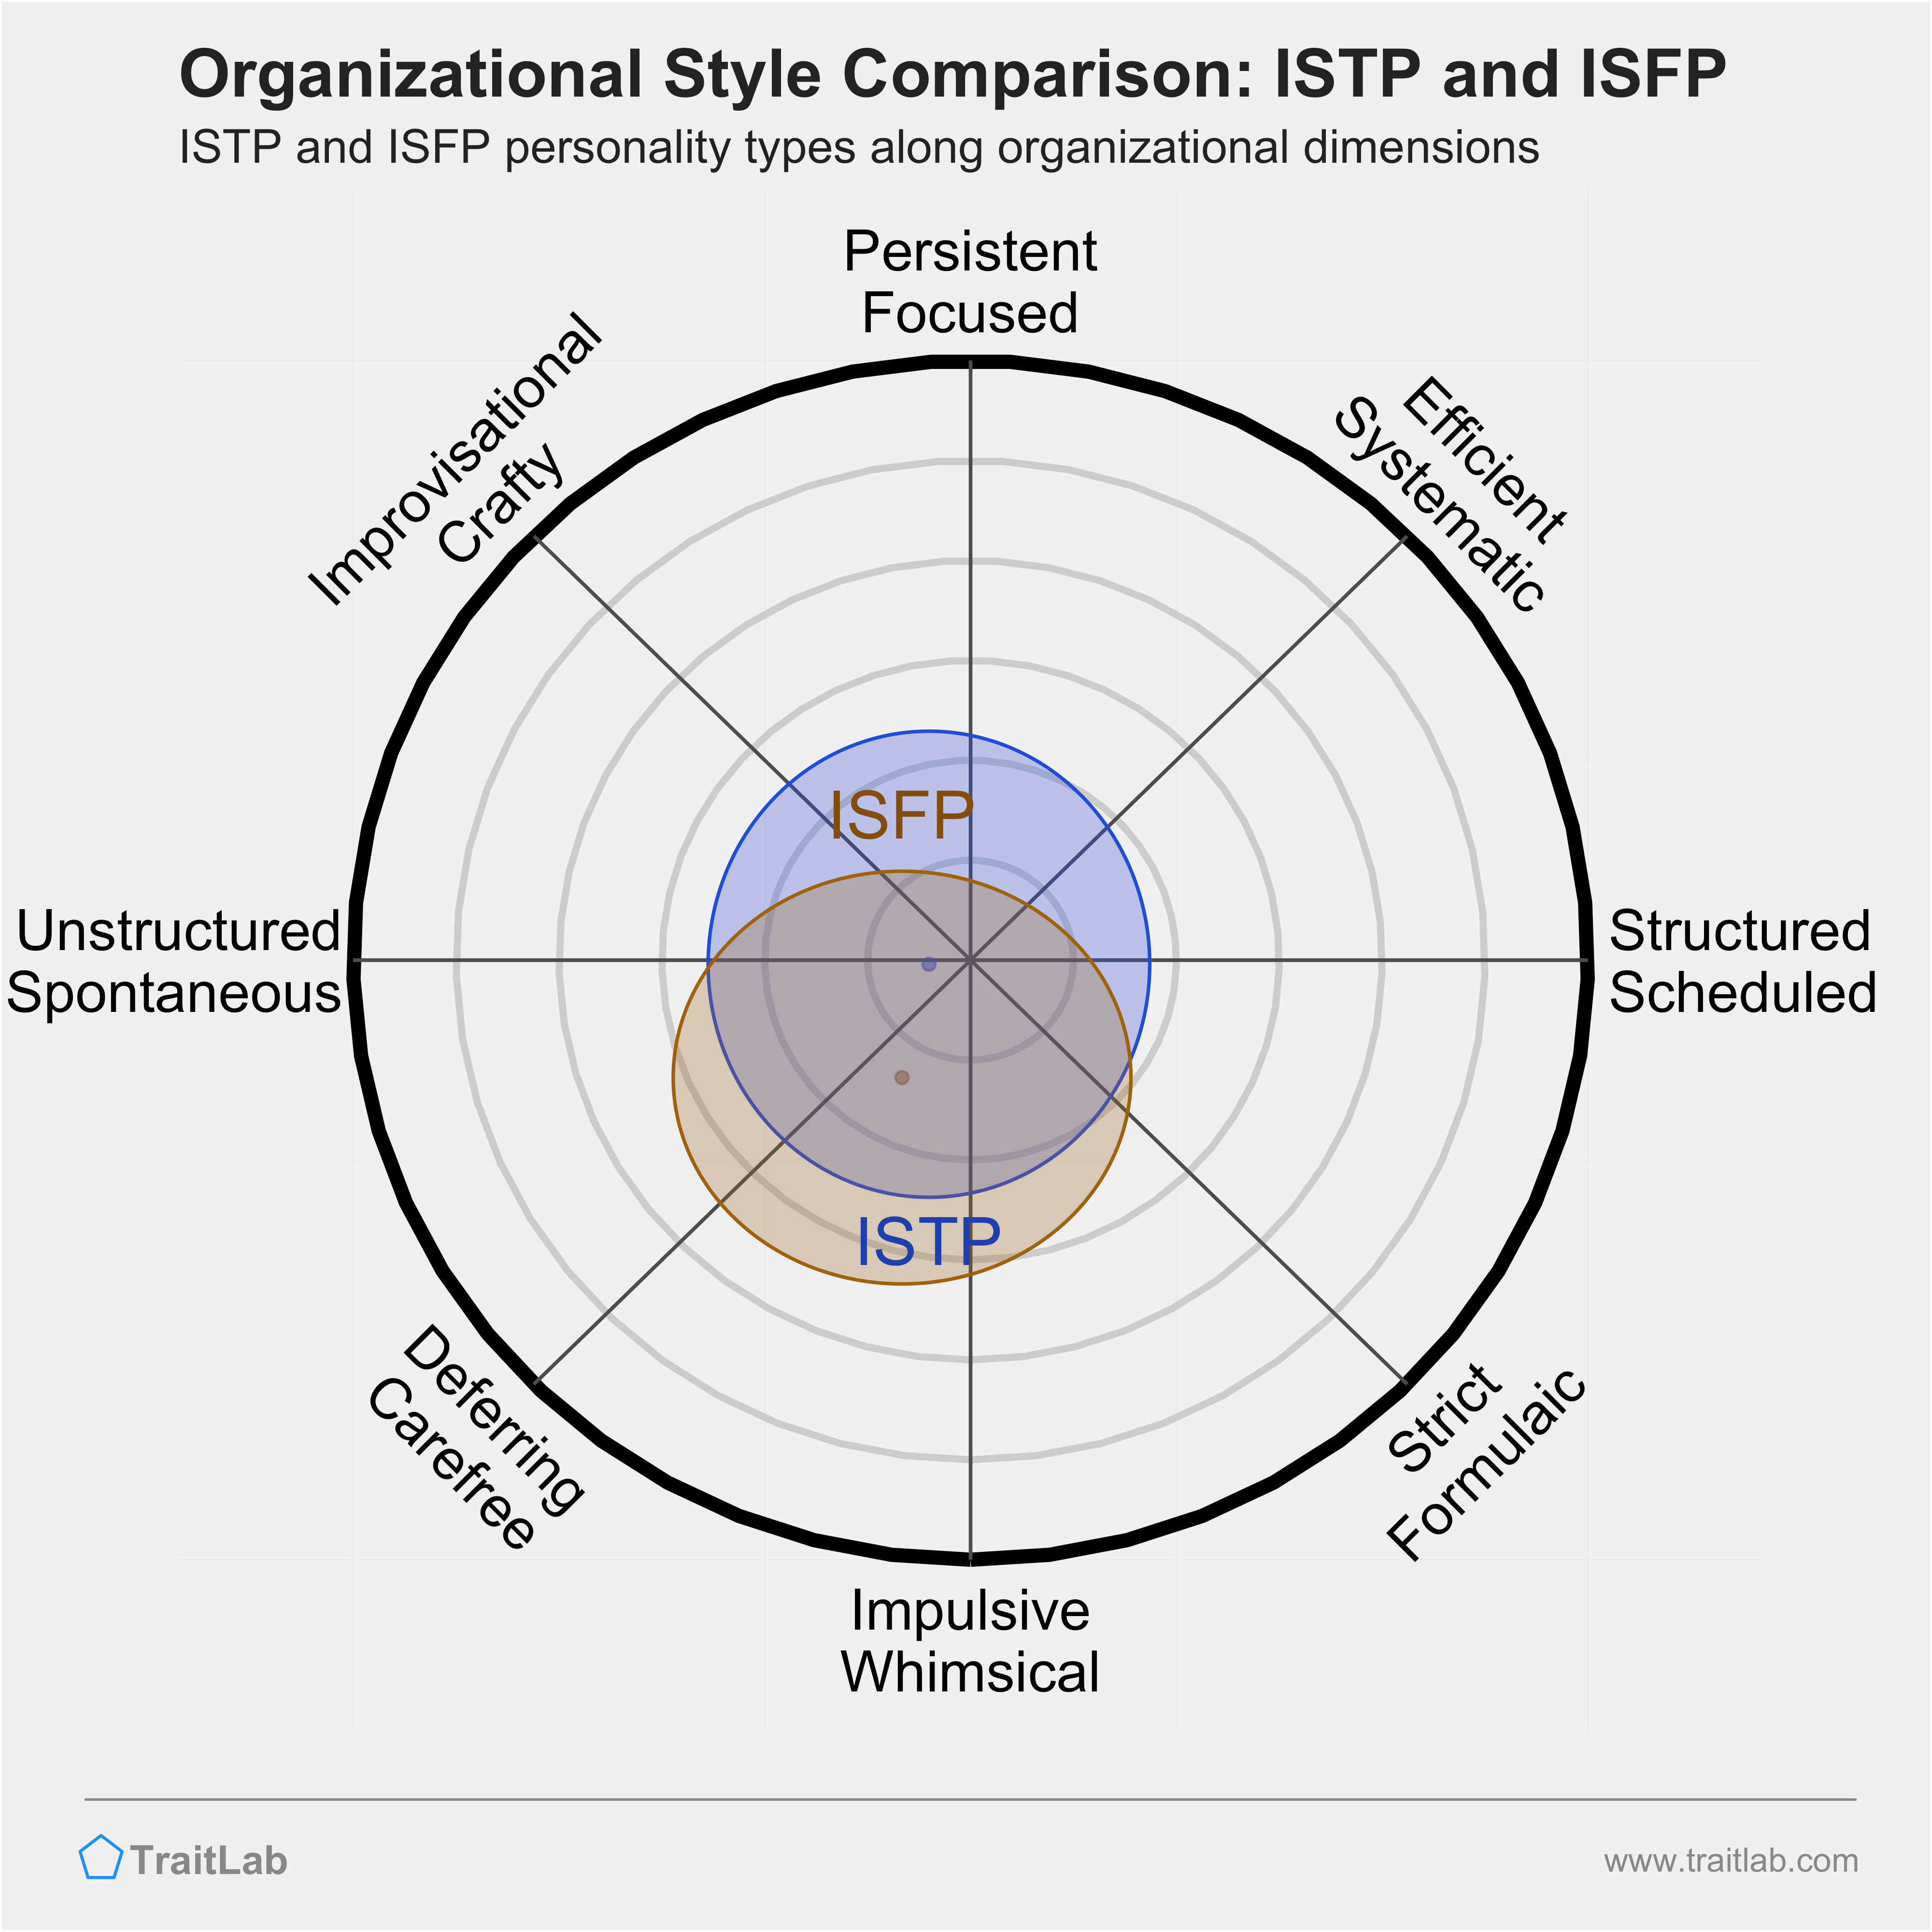 ISTP and ISFP comparison across organizational dimensions